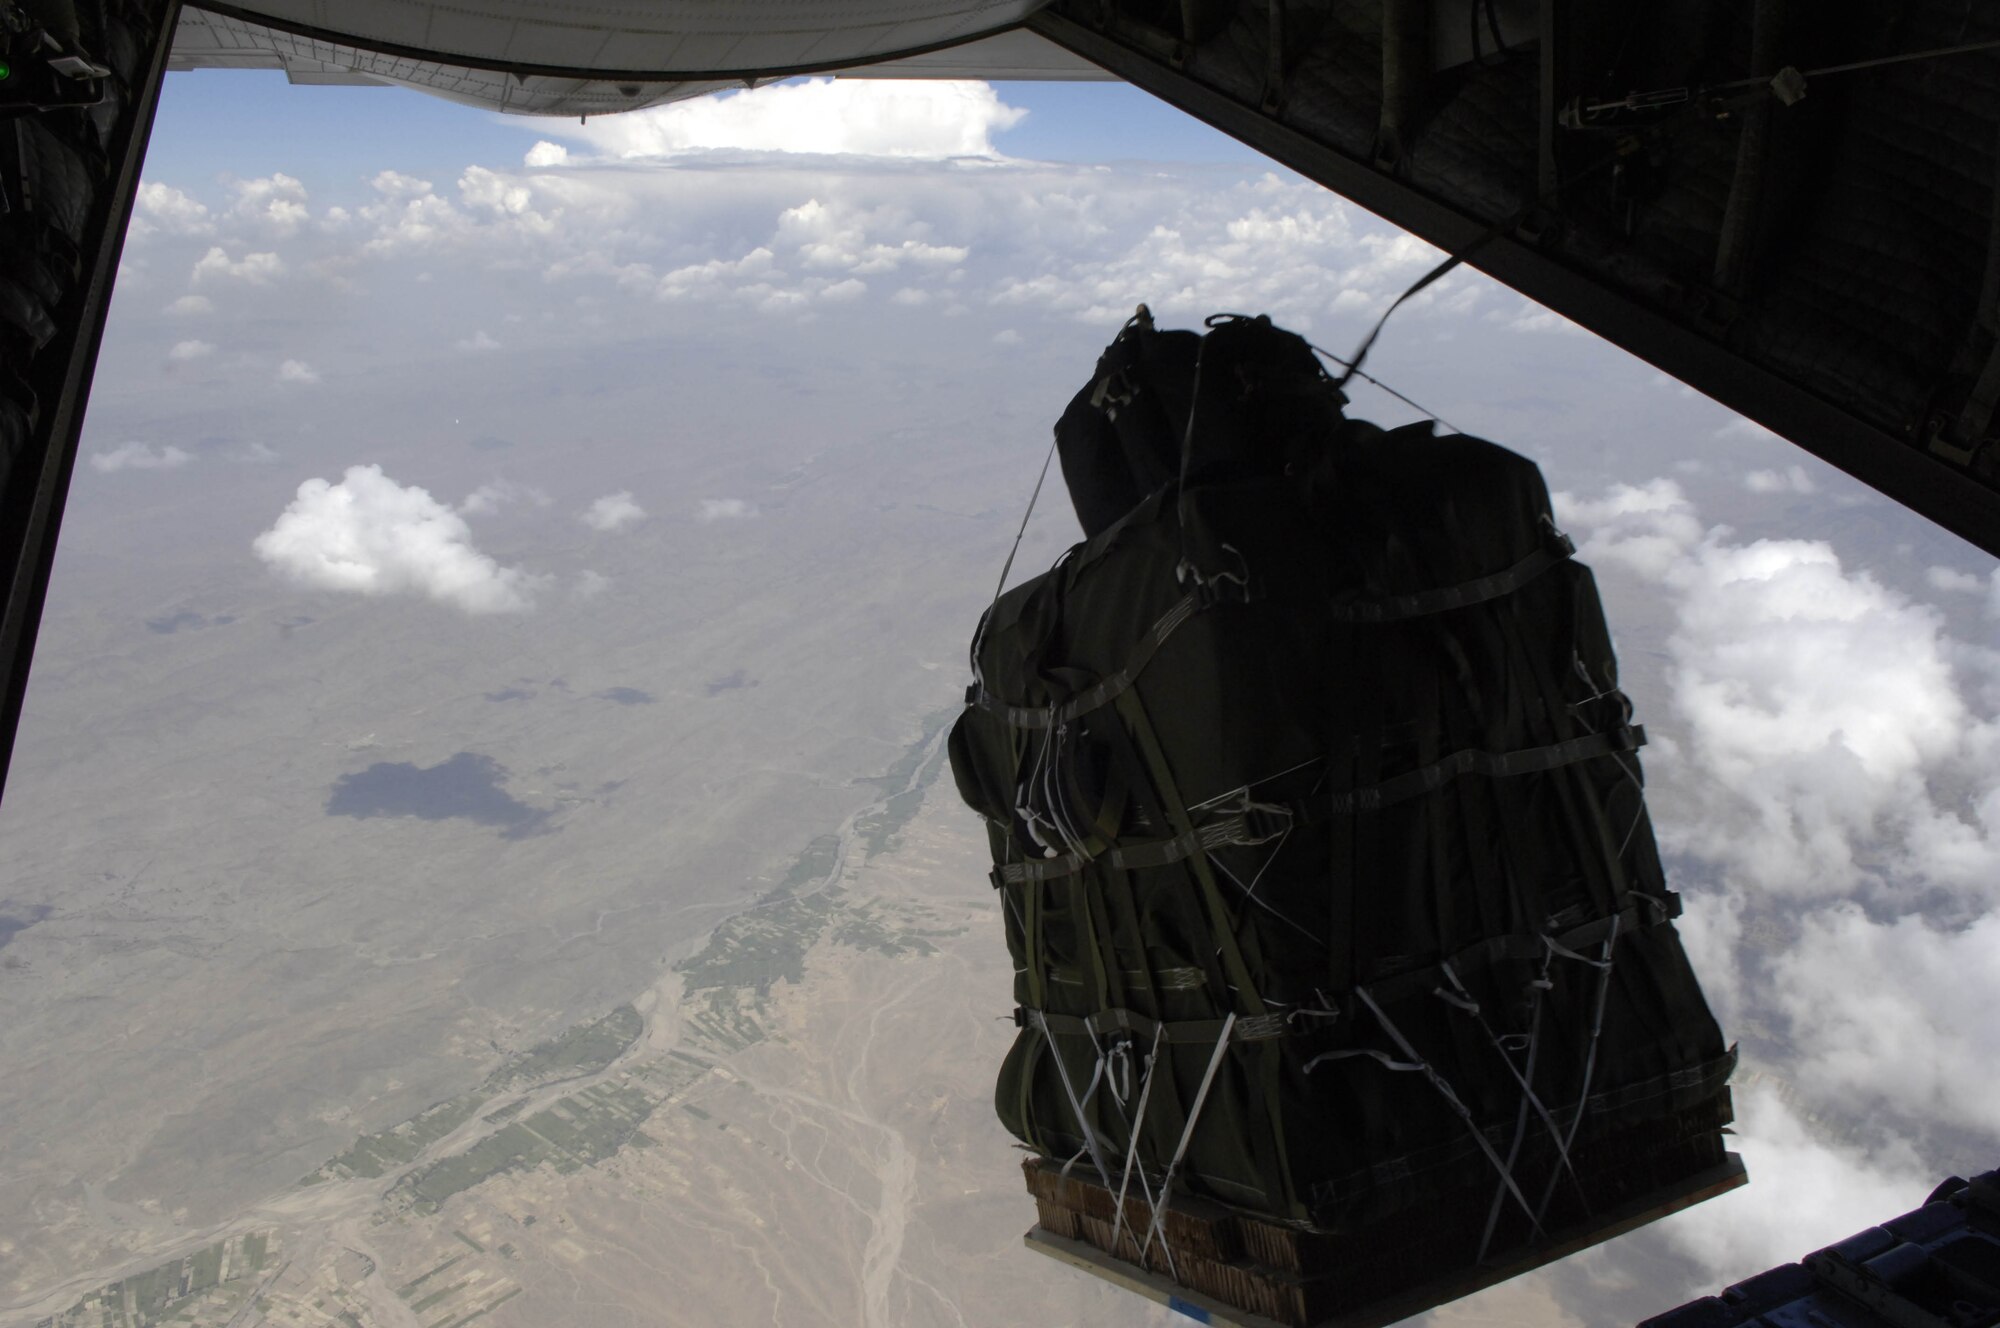 The new GPS guided Screamer 2K bundle, Joint Precision Air Drop System, fall out of the back of a C-130 Hercules over Afghanistan Aug. 26, 2006.  The drop was made from 17,500 feet above mean sea level, and was the first joint Air Force Army operational drop of JPADS in the Central Command Area of Responsibility.  Four bundles were dropped from the Alaska Air National Guard C-130.  The system is designed to provide precision airdrops from high altitudes, elimination the treat of small arms fire.  All four bundles arrived at the drop zone, less than 25 meters from the desired target.    
(U.S. Air Force photo/Senior Airman Brian Ferguson)
